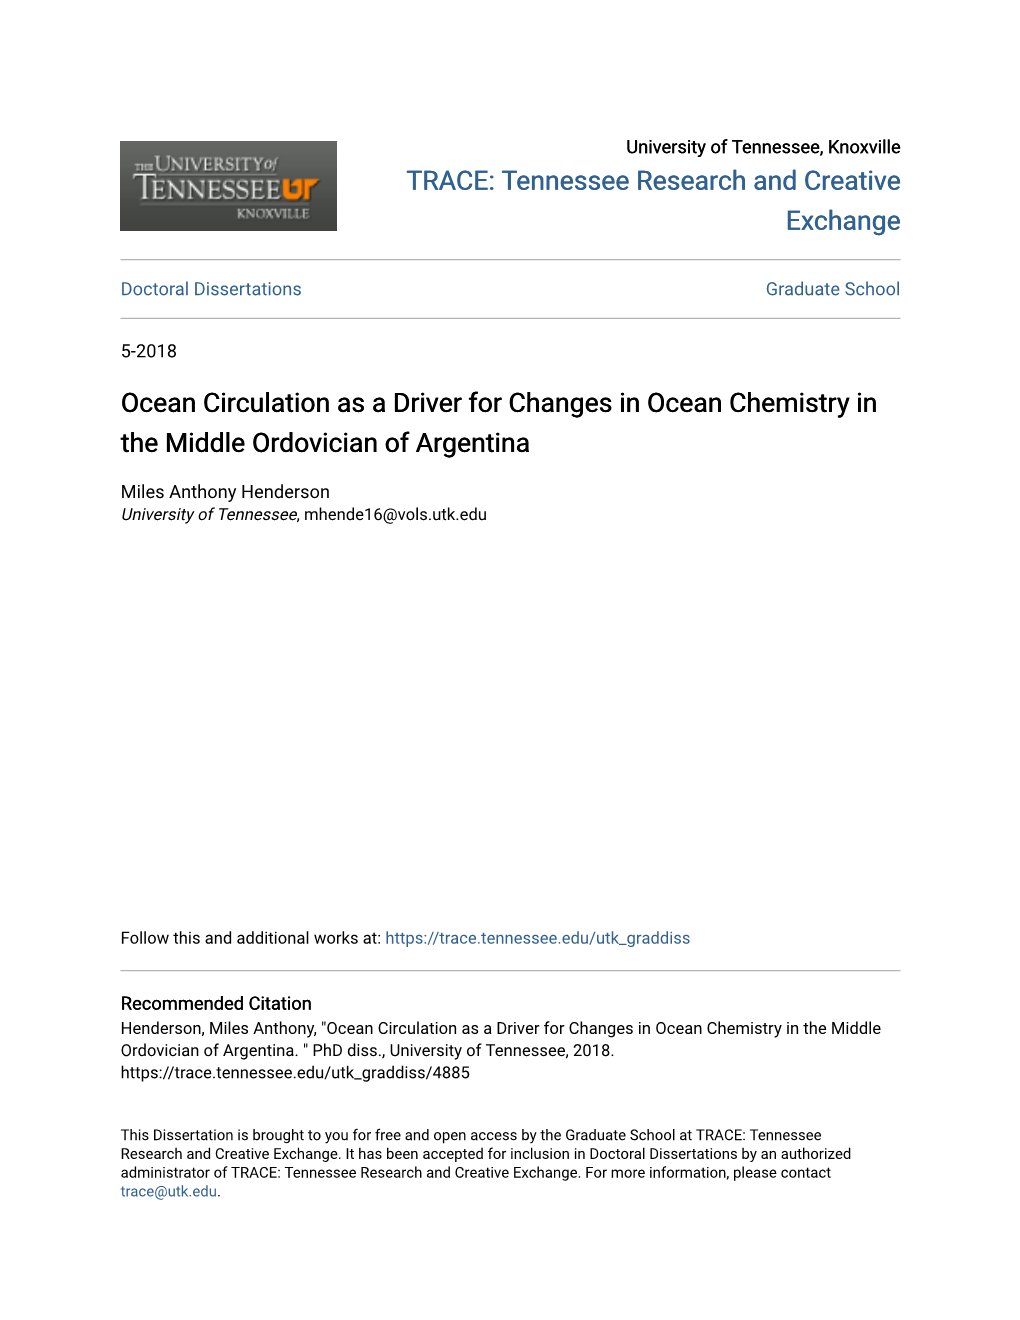 Ocean Circulation As a Driver for Changes in Ocean Chemistry in the Middle Ordovician of Argentina